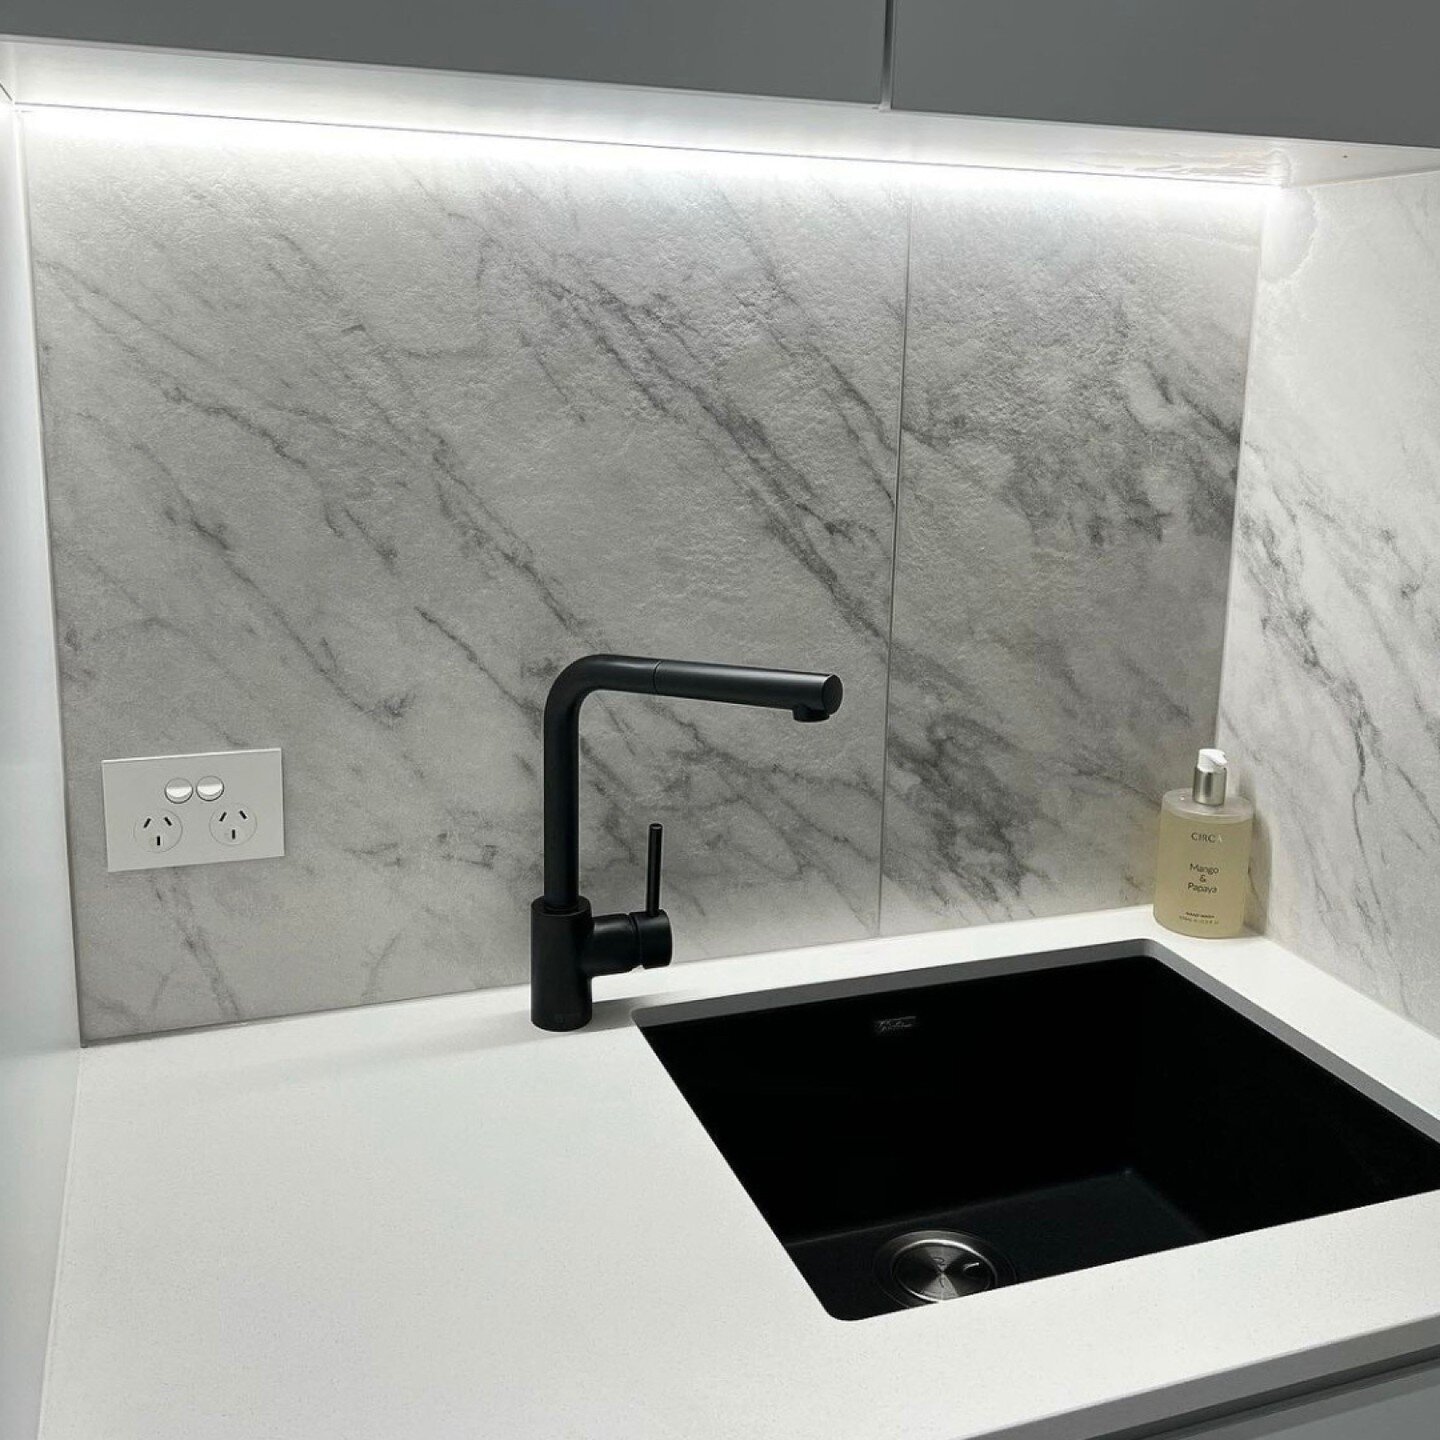 Subtle yet Stunning Finish ✨

The Hager Finesse Range on a Marble Tile Splashback complete with the latest LED Cob Strip from Rapid LED

Power Point - @hager_au
Lighting - @rapid_led
Tiling - @rangi_tiling

For a free quote, please email Tim on tim@l